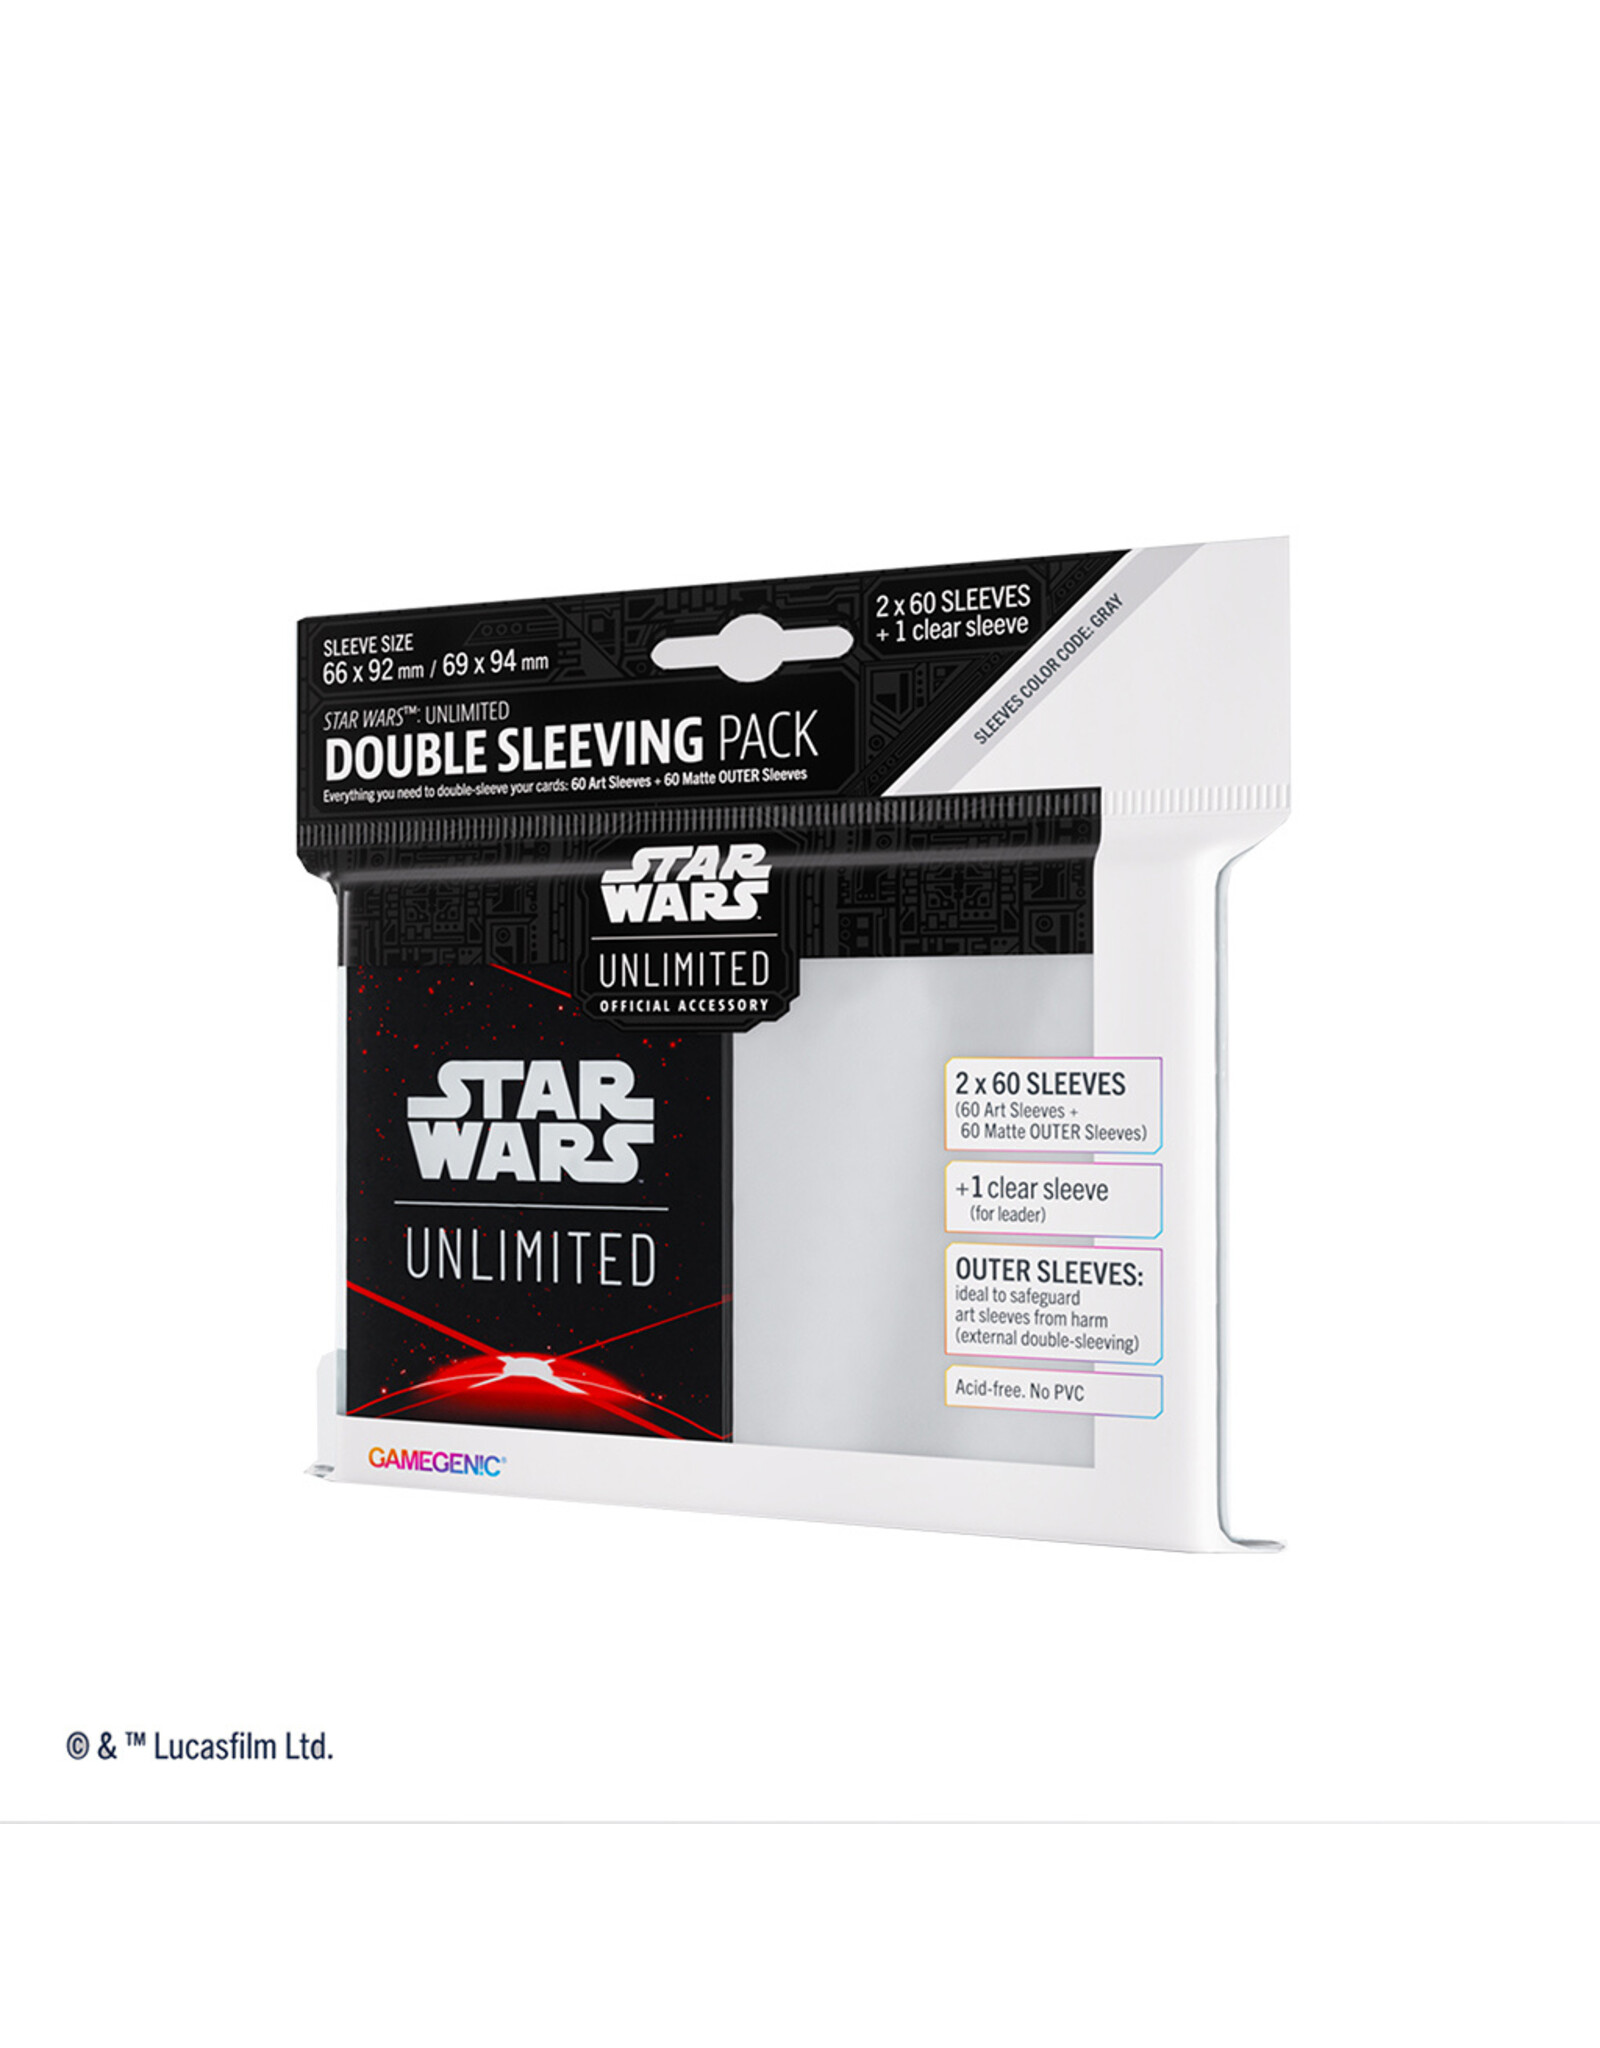 GameGenic Star Wars: Unlimited Art Sleeves Double Sleeving Pack - Space Red